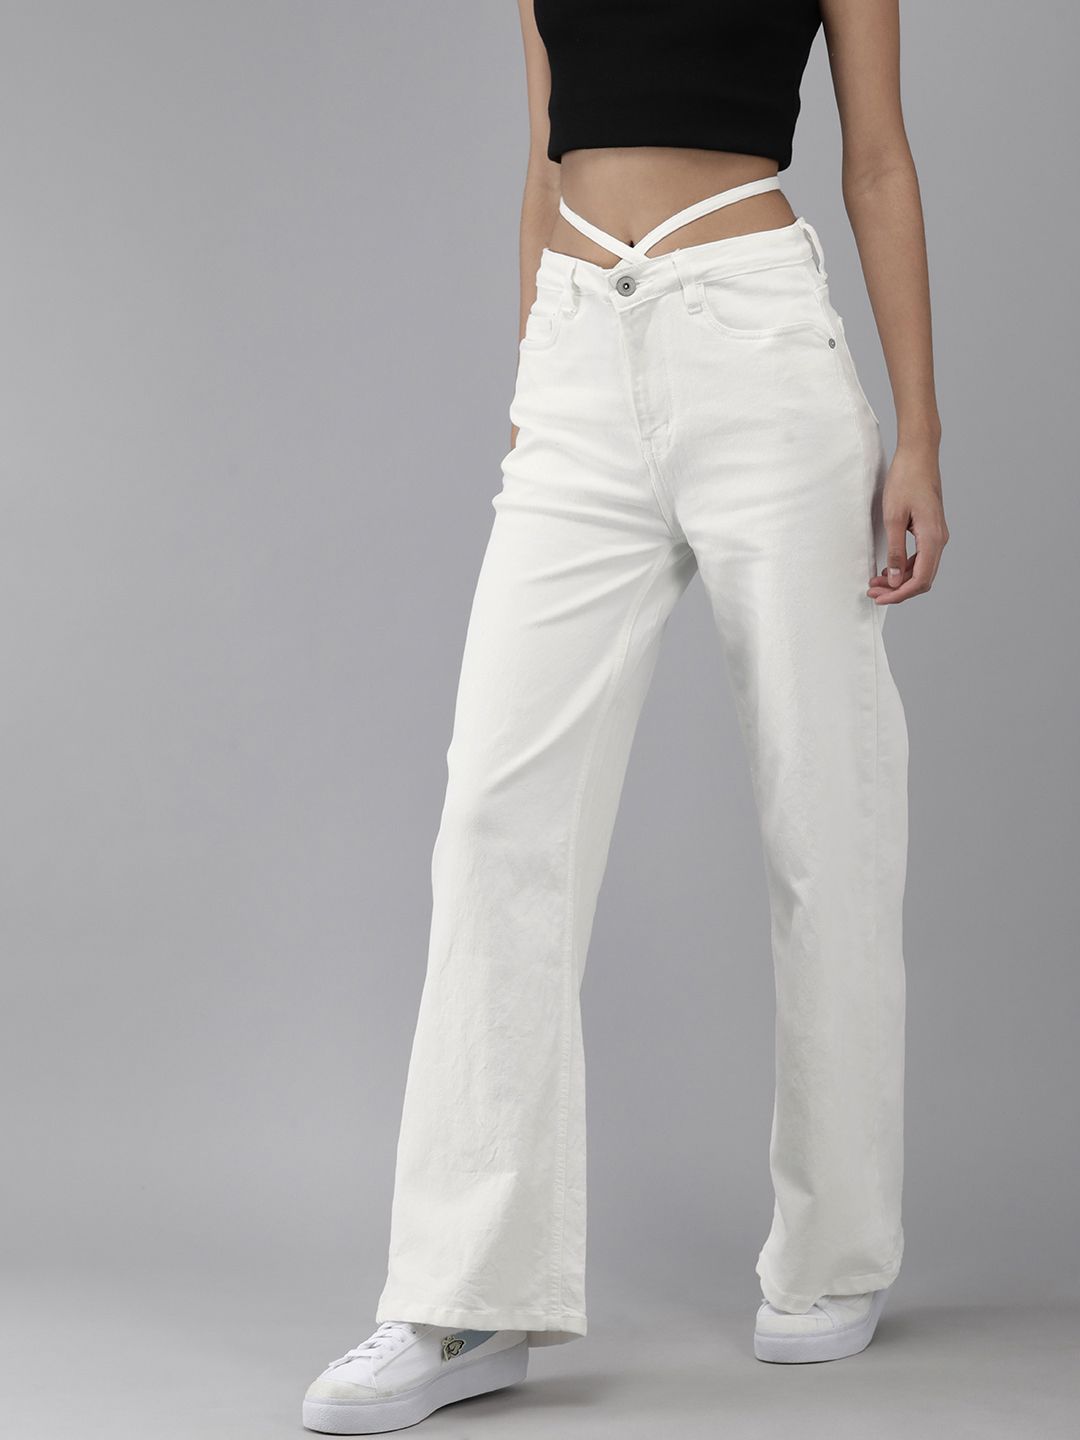 Roadster Women White Wide Leg High-Rise Stretchable Jeans With Tie-up Detail At the Waist Price in India